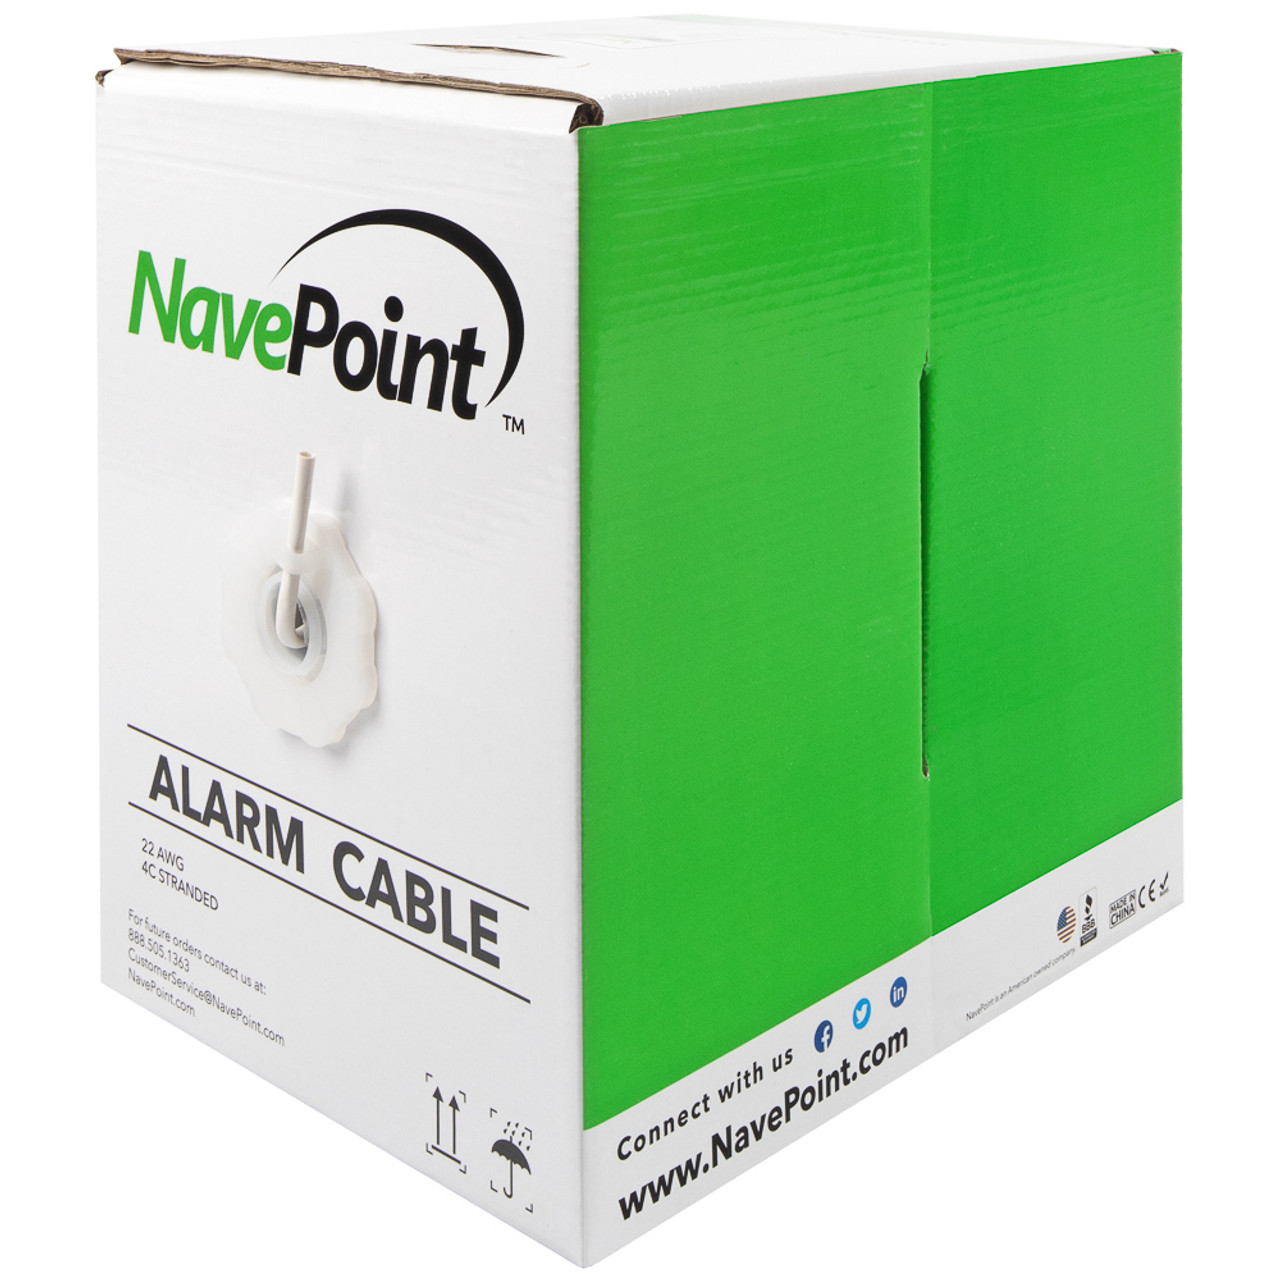 NavePoint Security Burglar Alarm Cable 22/4 22AWG Unshielded 500 Ft White